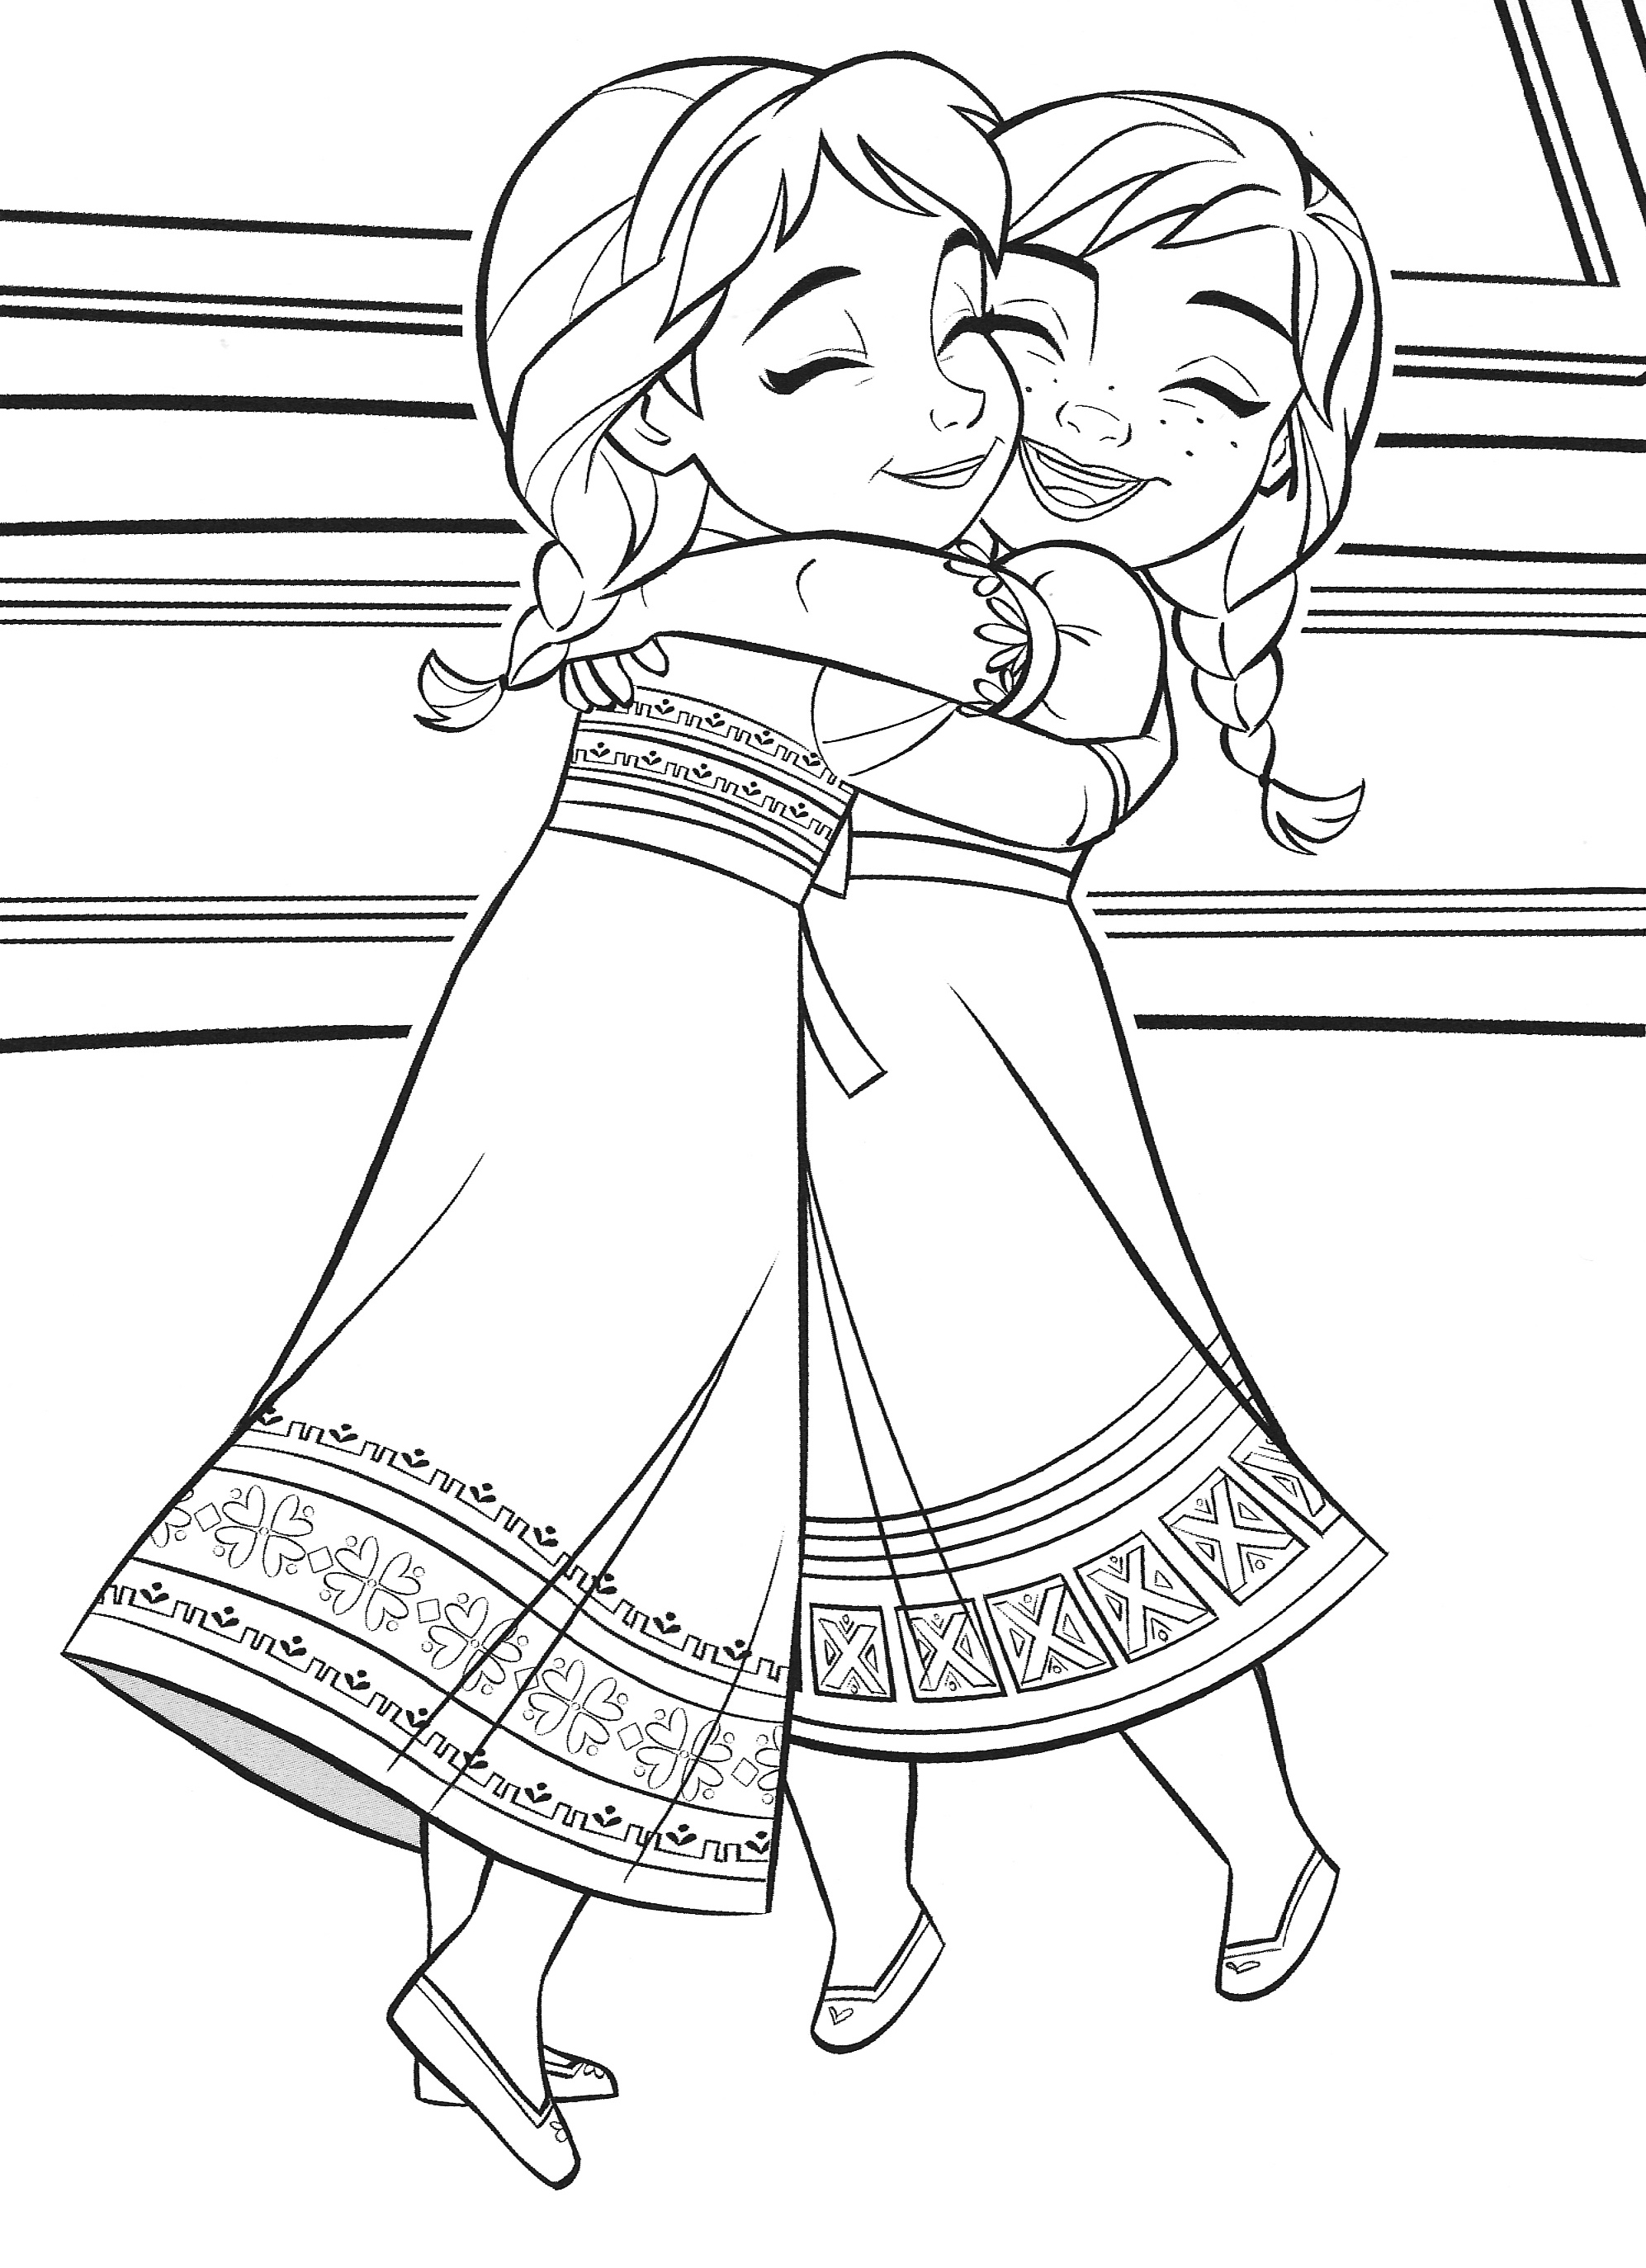 frozen-2-elsa-and-anna-coloring-pages-youloveit